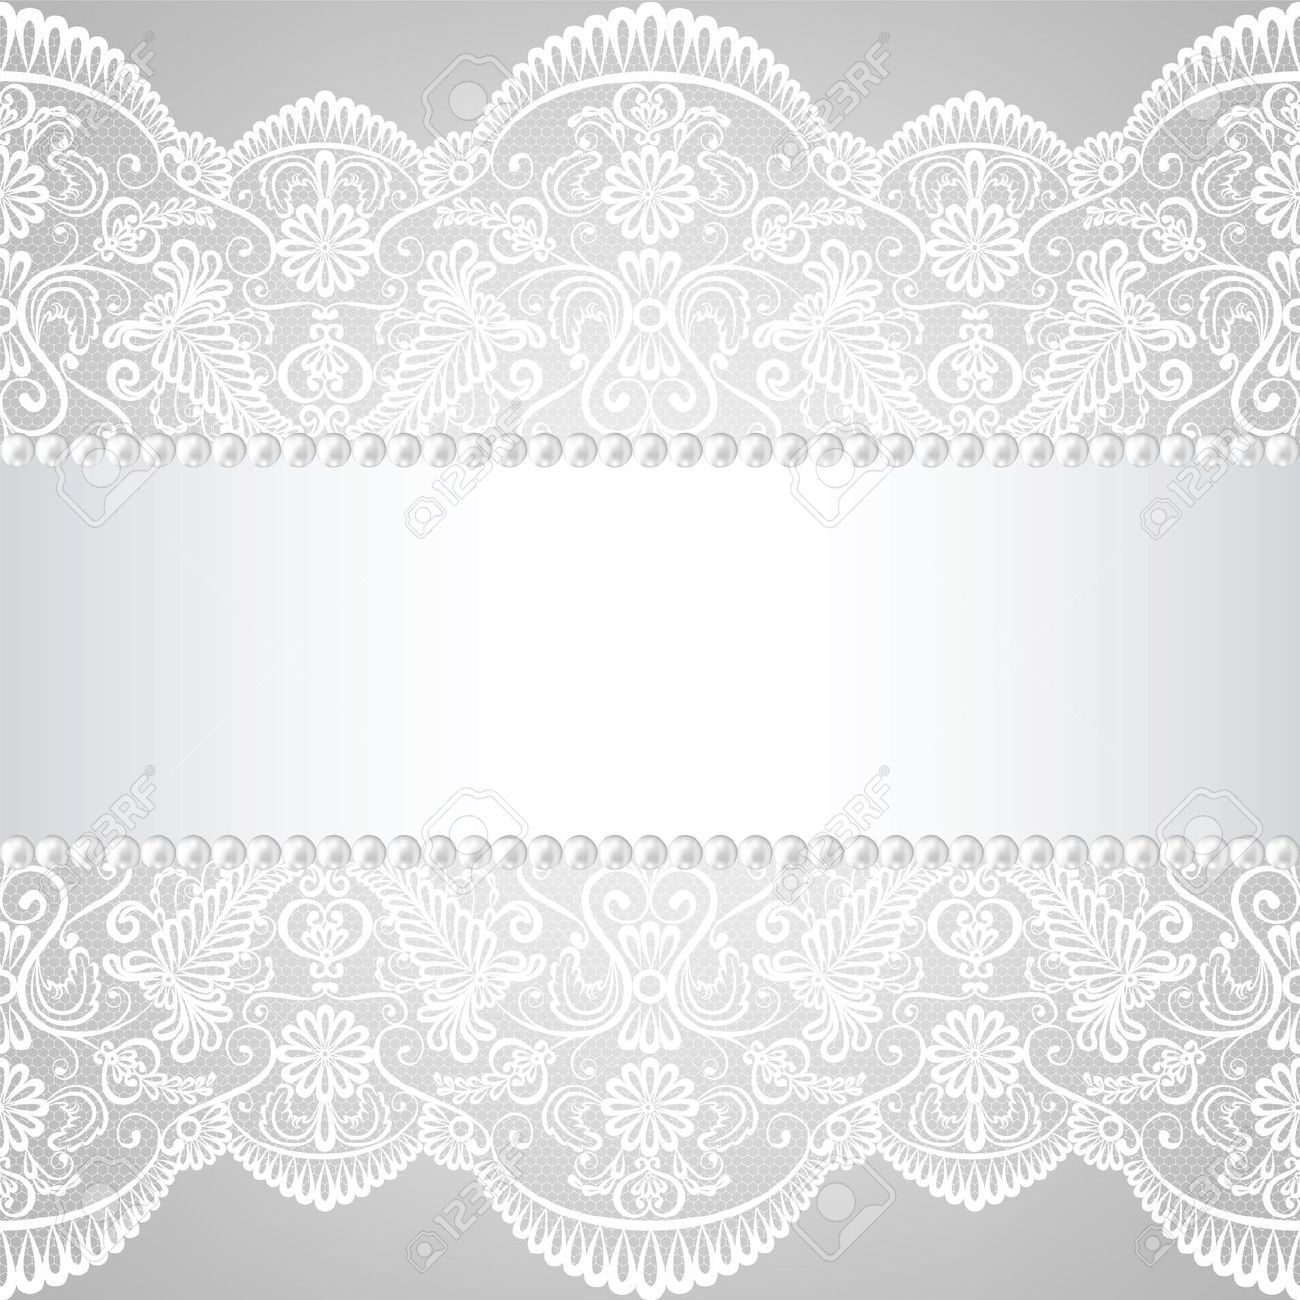 Lace Stock Photos Pictures Royalty Free Lace   image